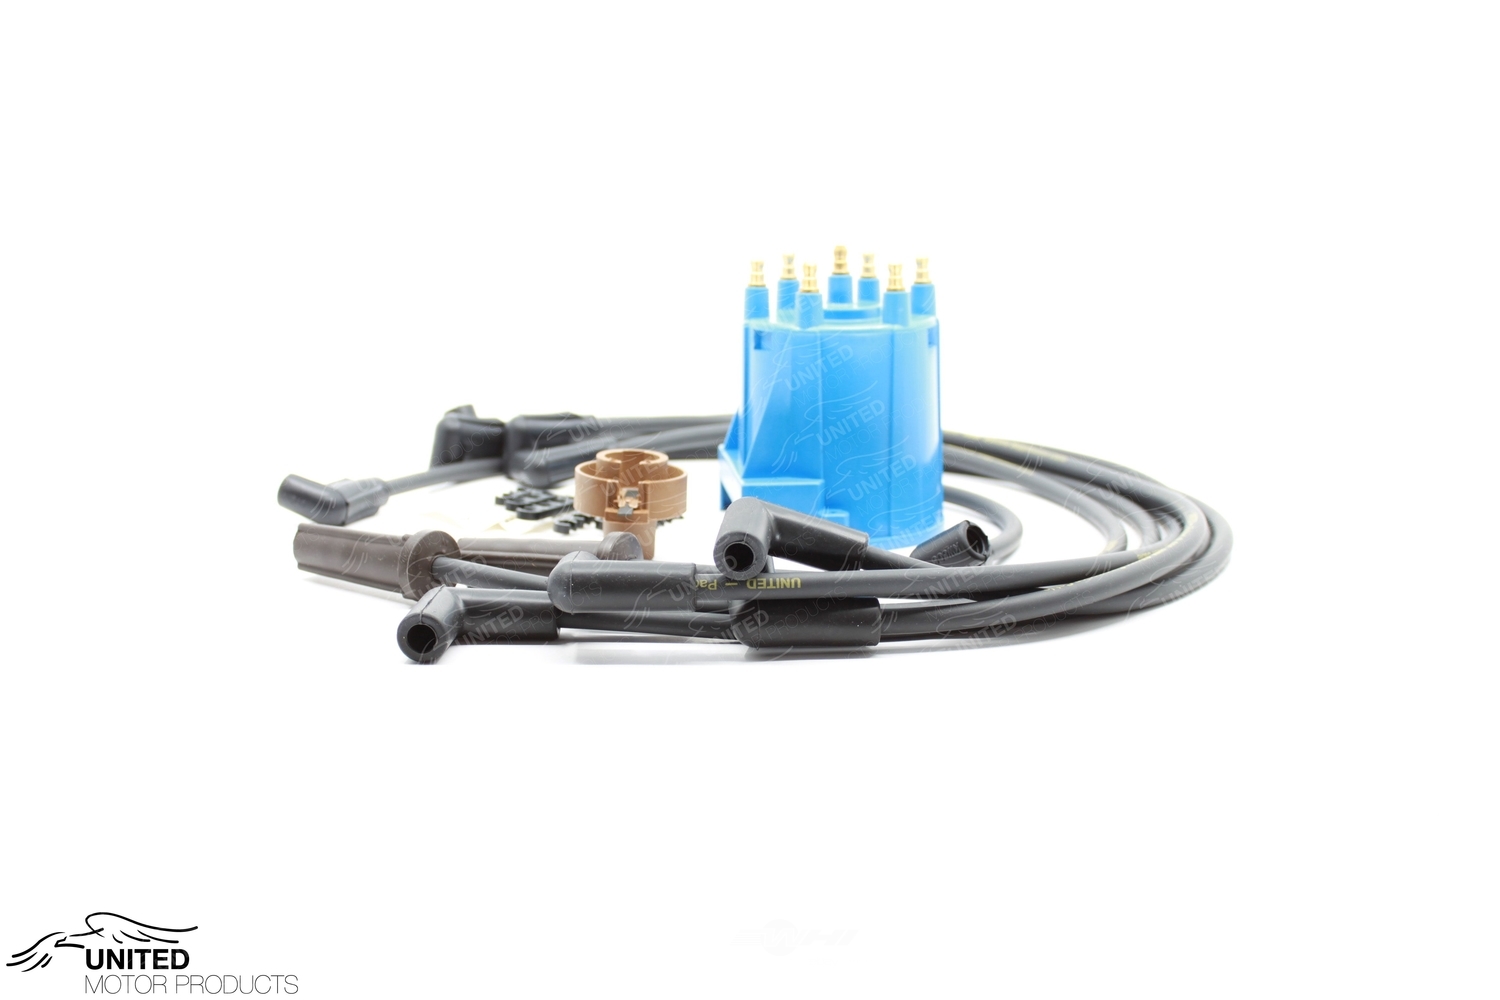 UNITED MOTOR PRODUCTS - Ignition Tune-Up Kit - UIW 3860